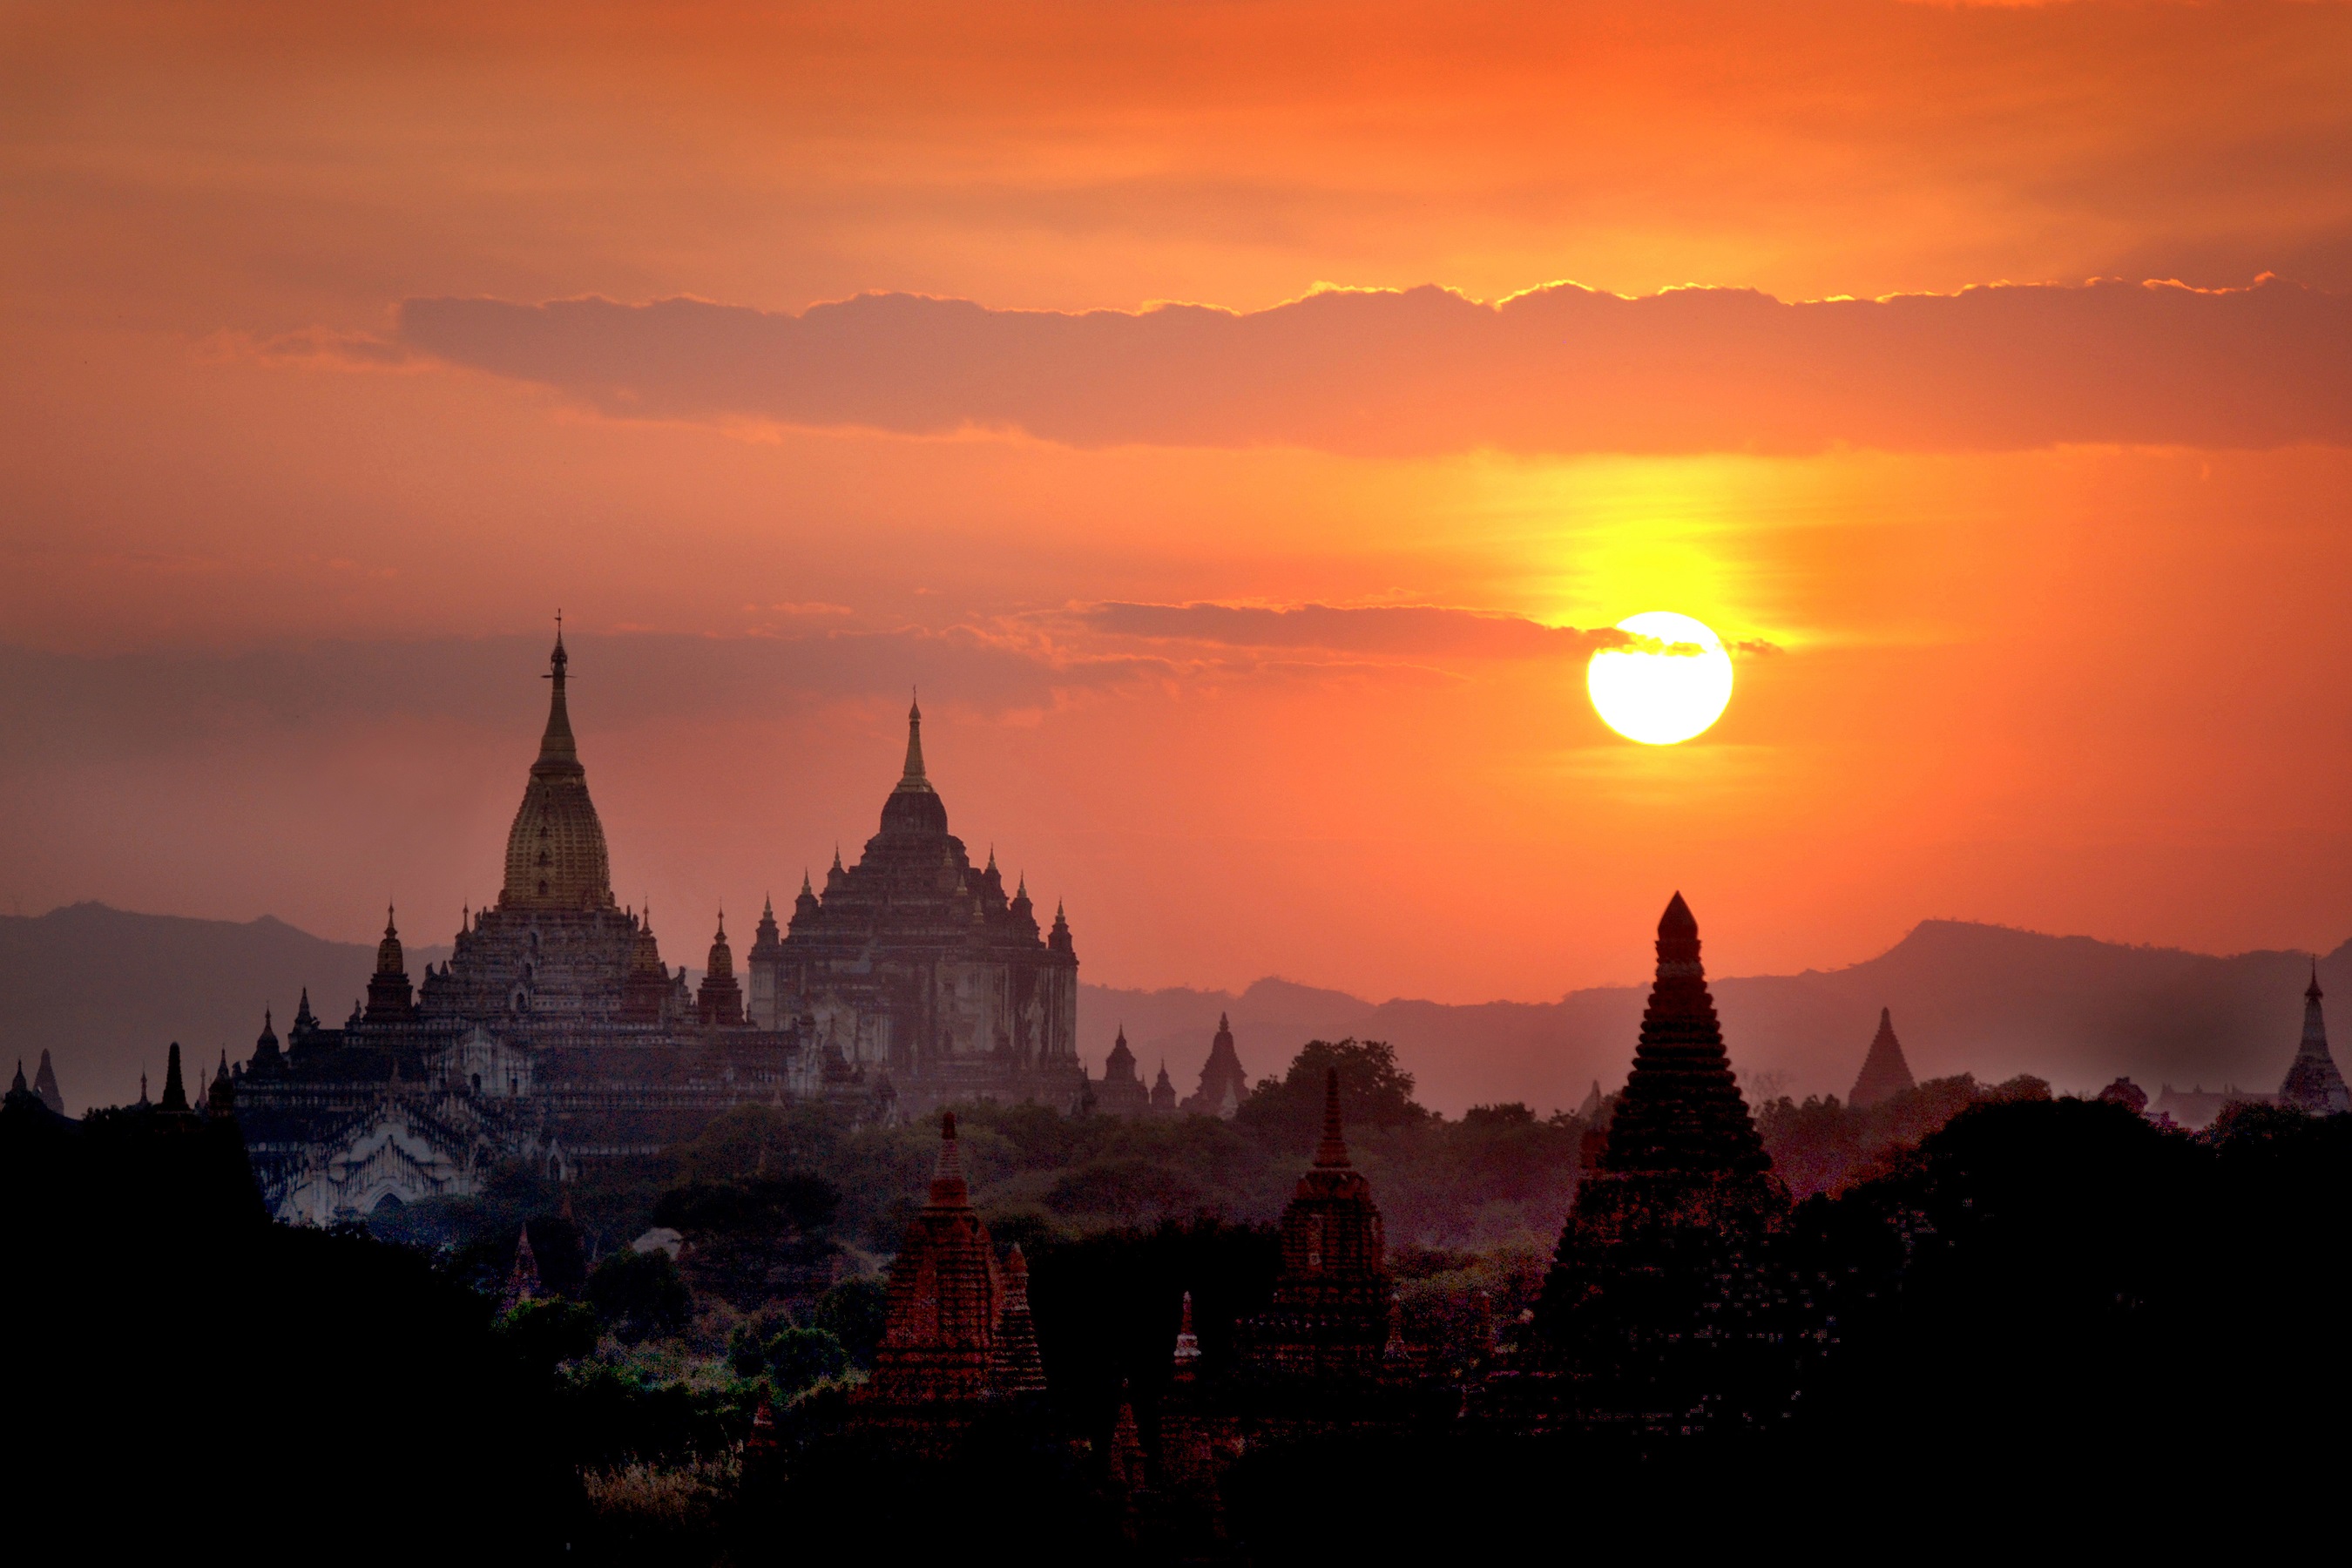 Visa-On-Arrival into Myanmar granted to 6 more countries - Asia Pacific